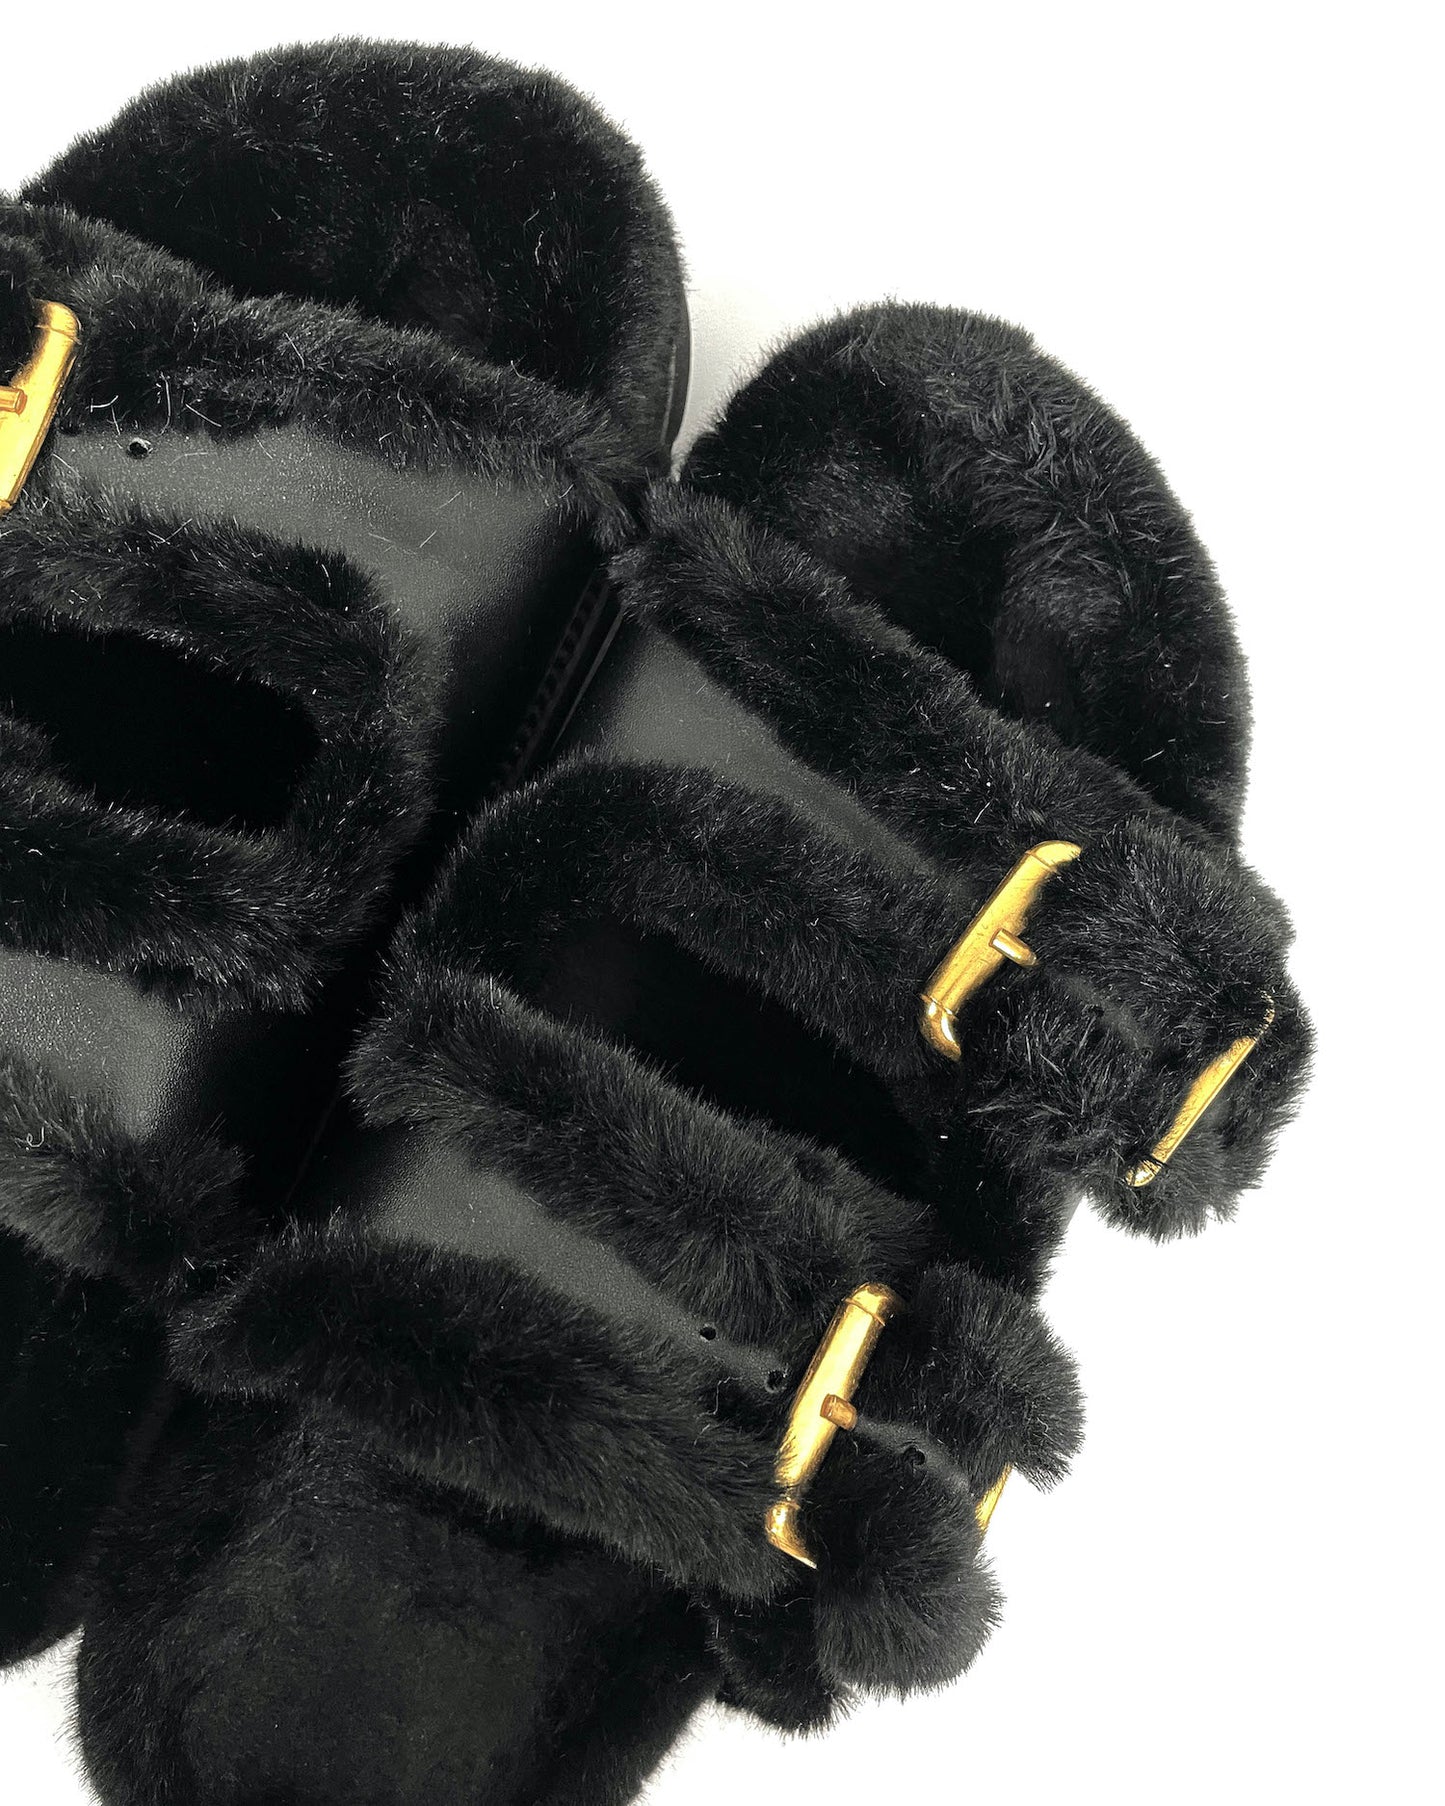 black leather furry slippers -36